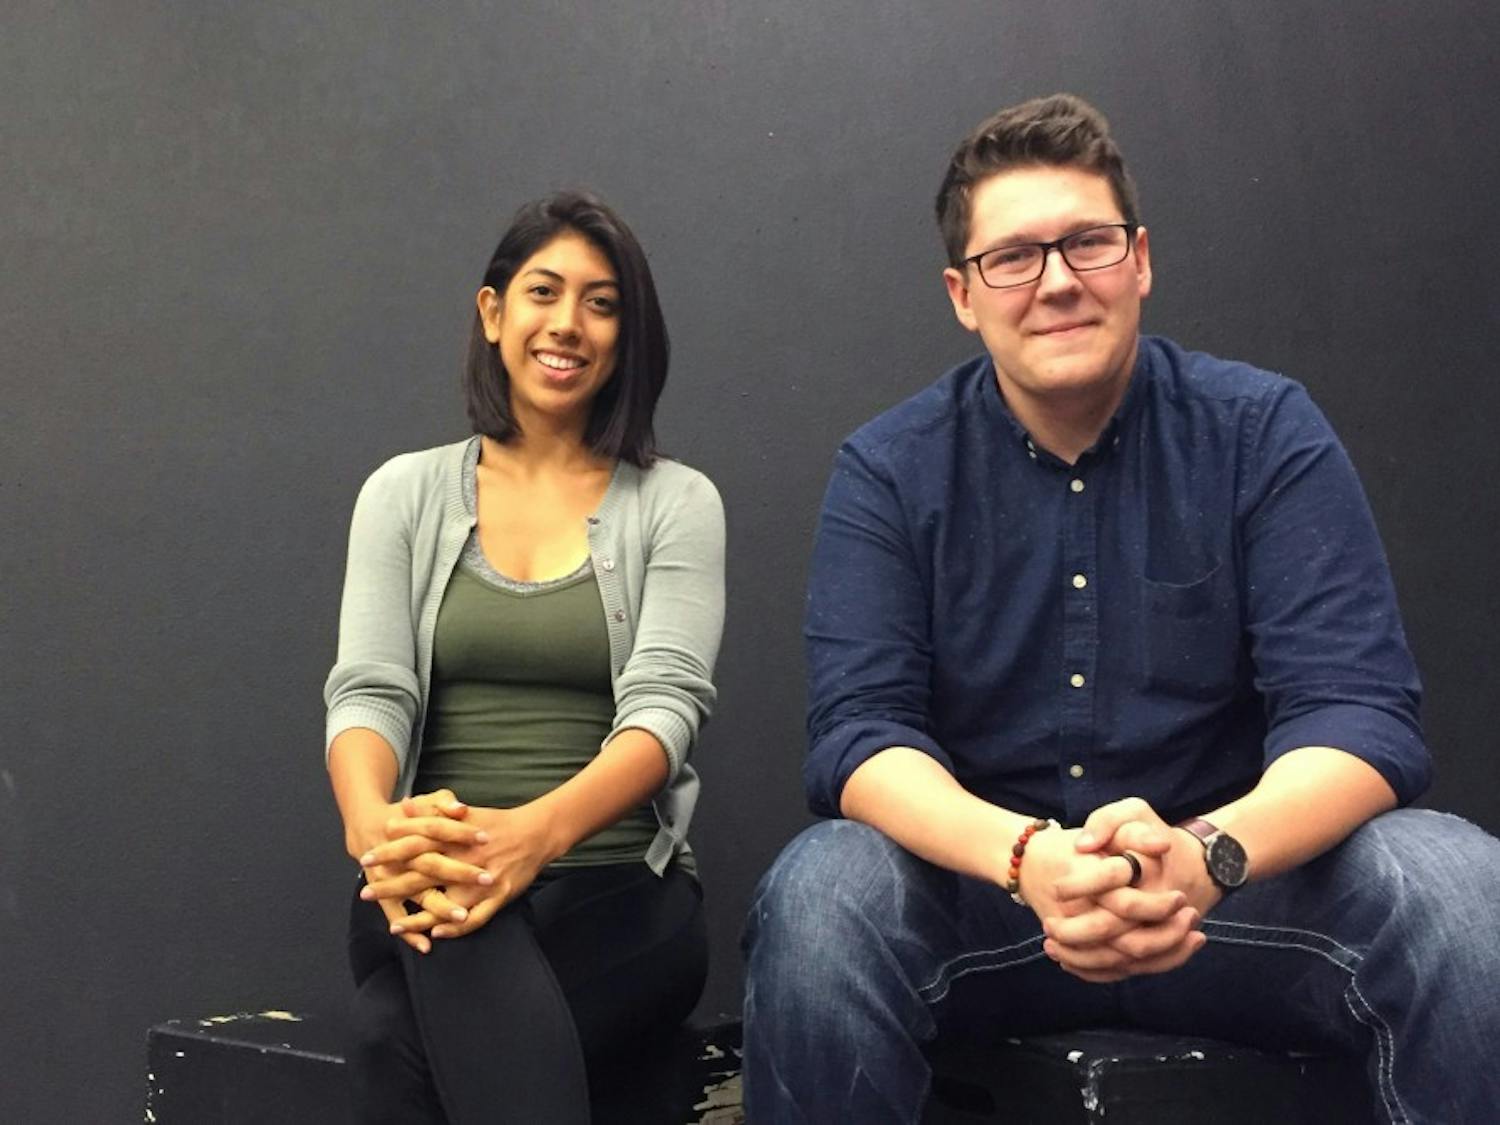 Anya Hernandez and Evan Carson, the new leadership team of Binary Theater, pose for a photo on Sept. 20, 2016.